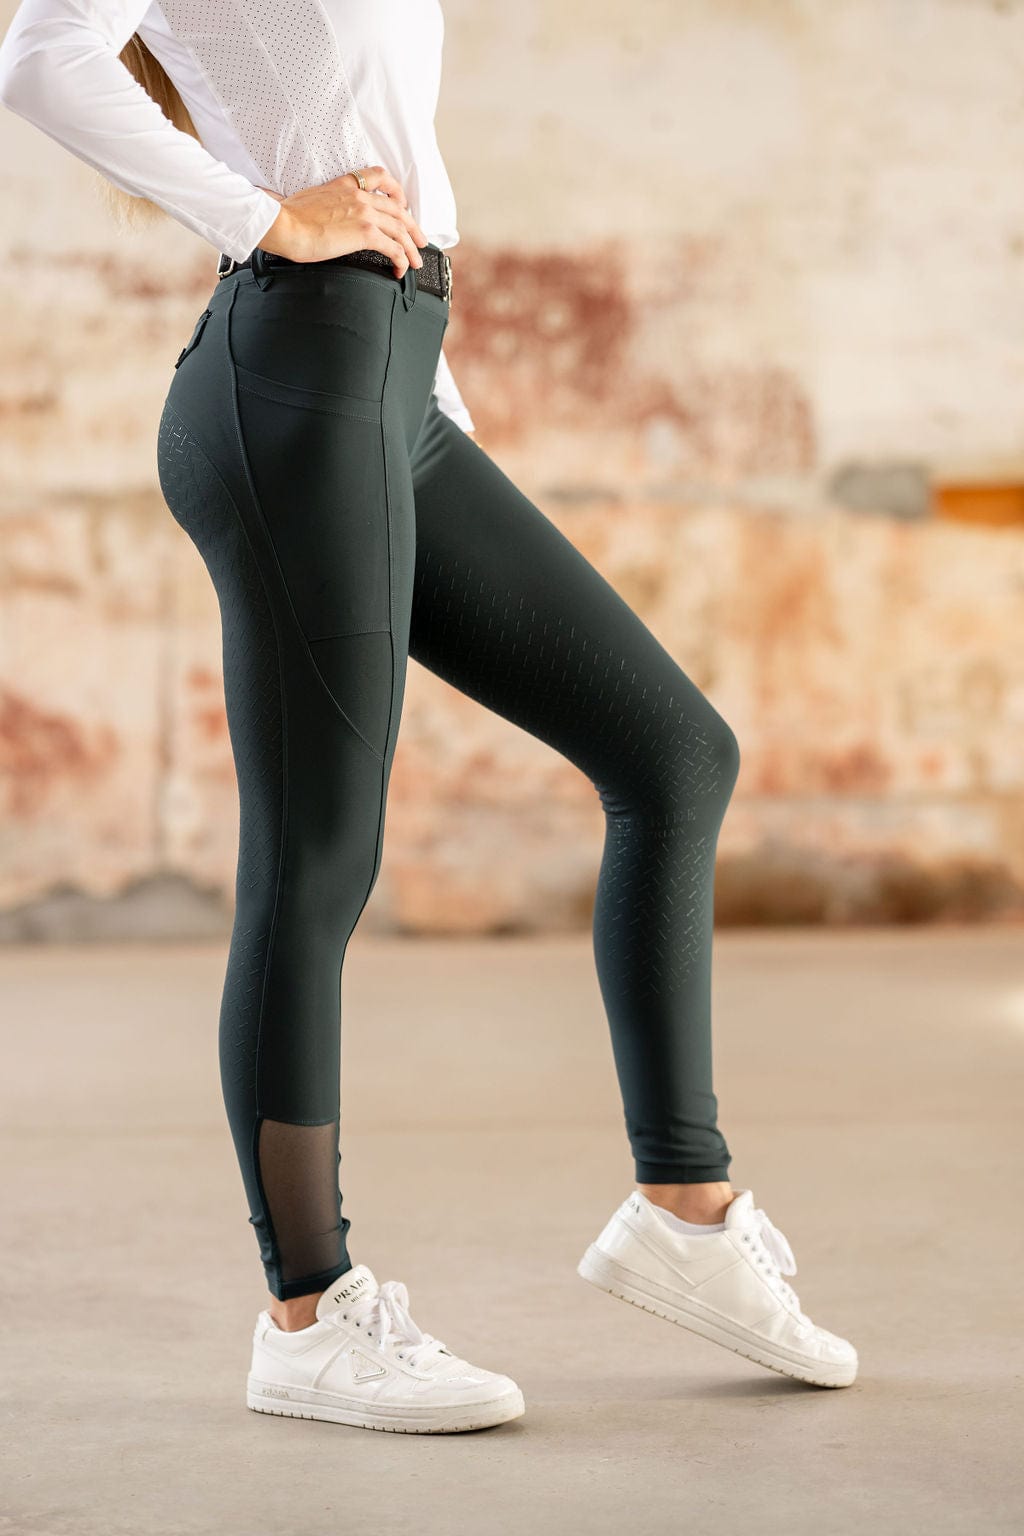 Cheap riding tights – the best on a budget